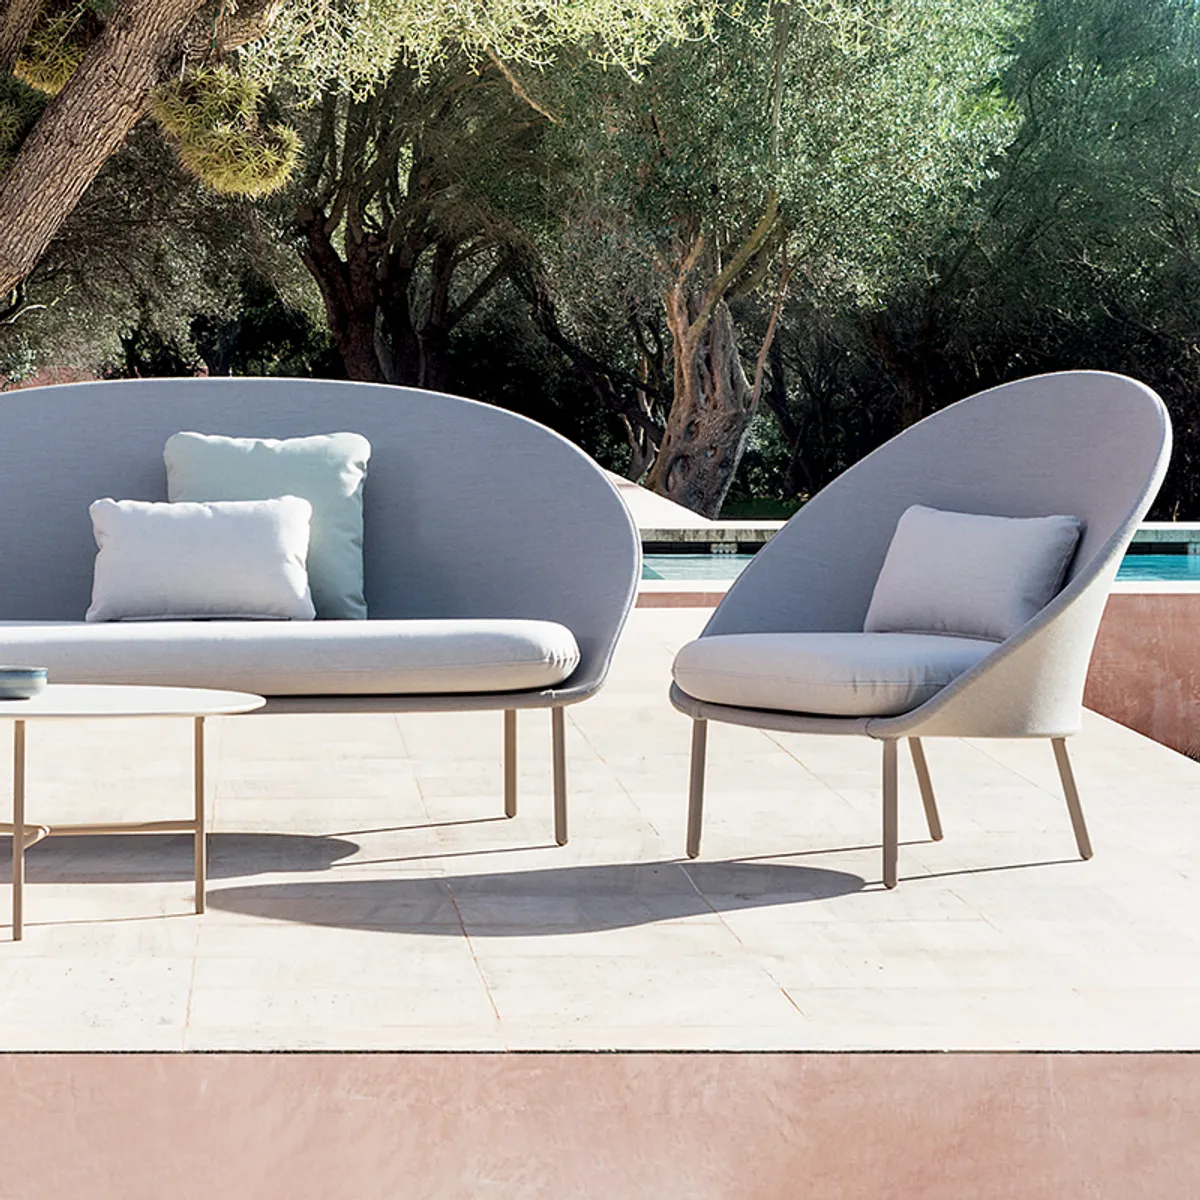 Gemini Collection Outdoor Furniture Set Inside Out Contracts 1